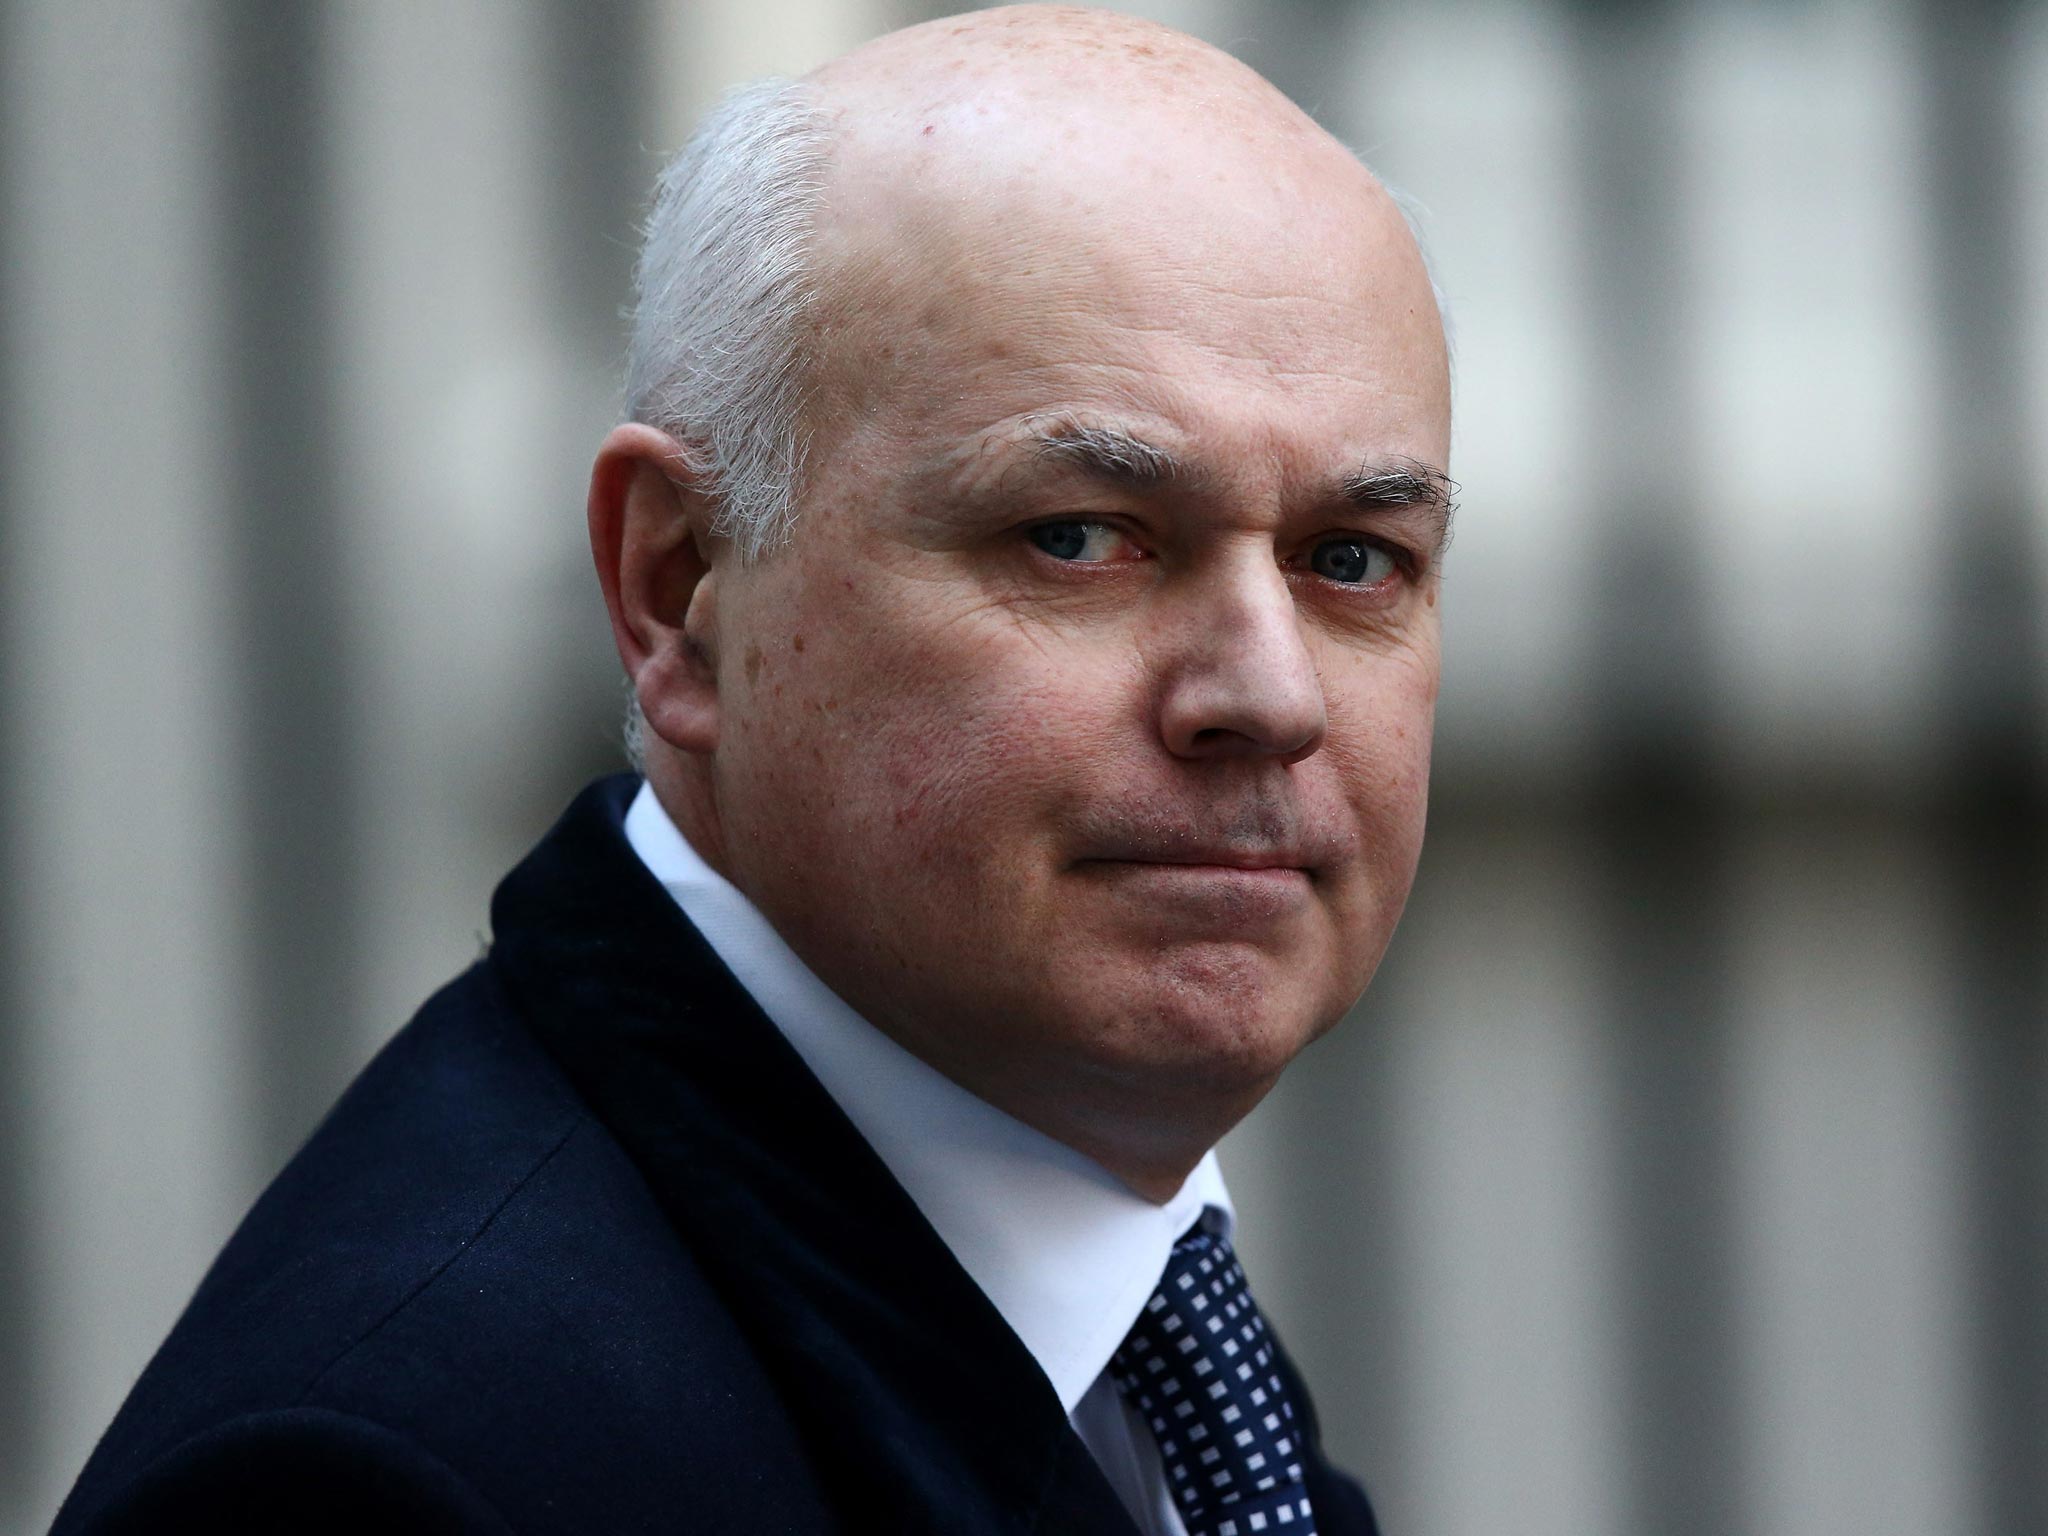 The Secretary of State for Work and Pensions Iain Duncan-Smith